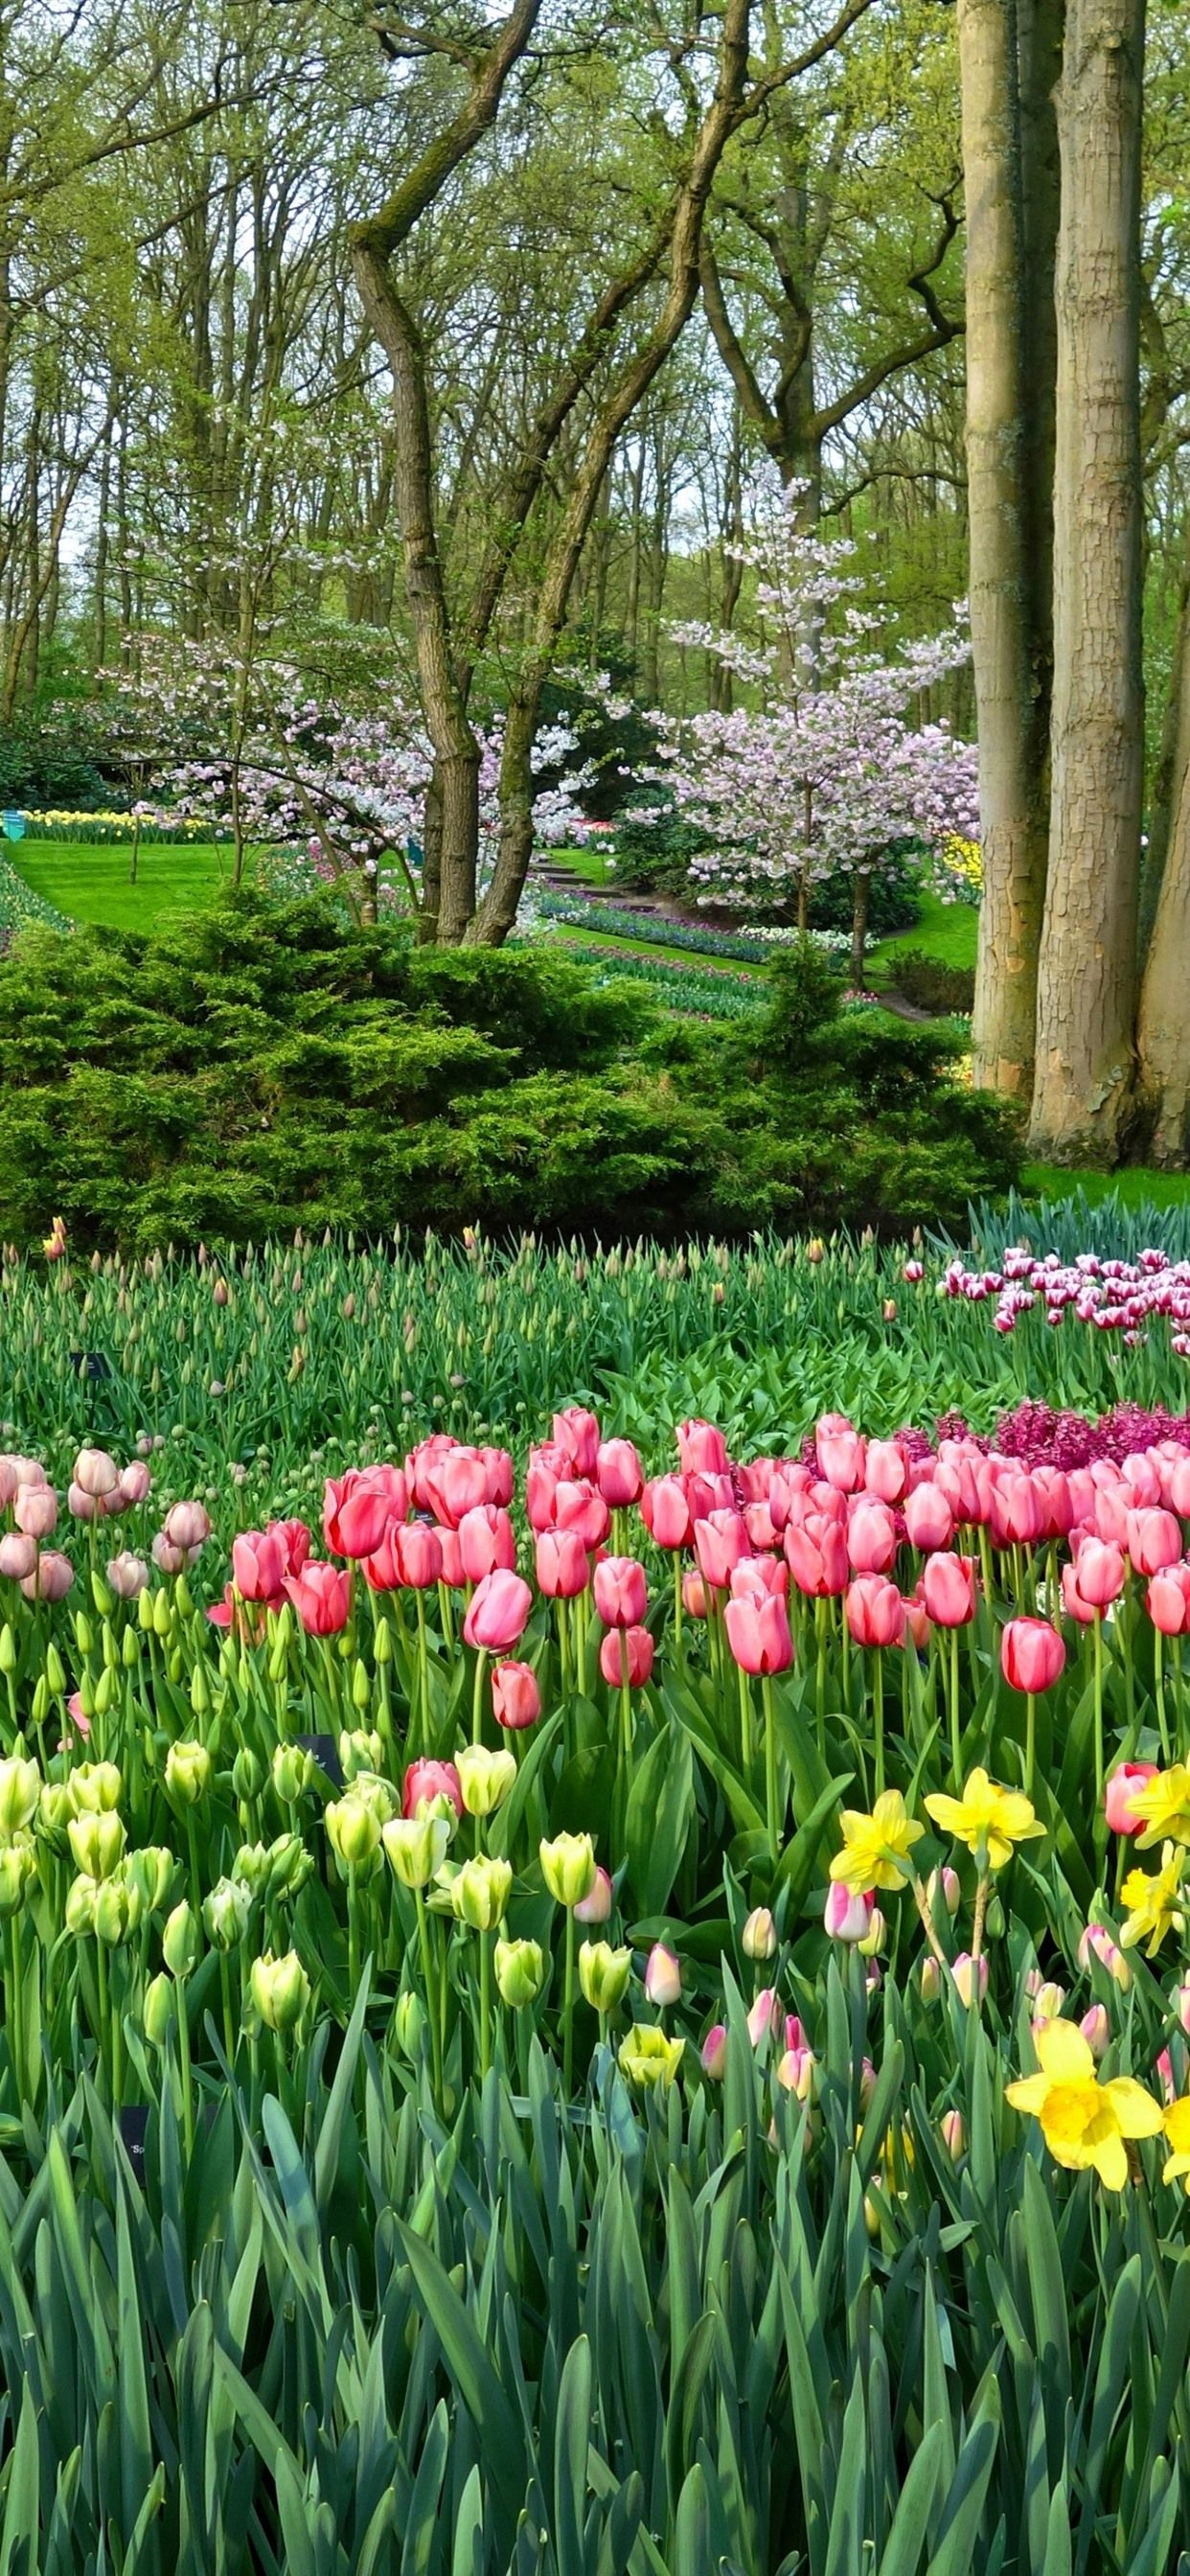 Park, Many Tulips, Trees, Spring 1242x2688 IPhone 11 Pro XS Max Wallpaper, Background, Picture, Image